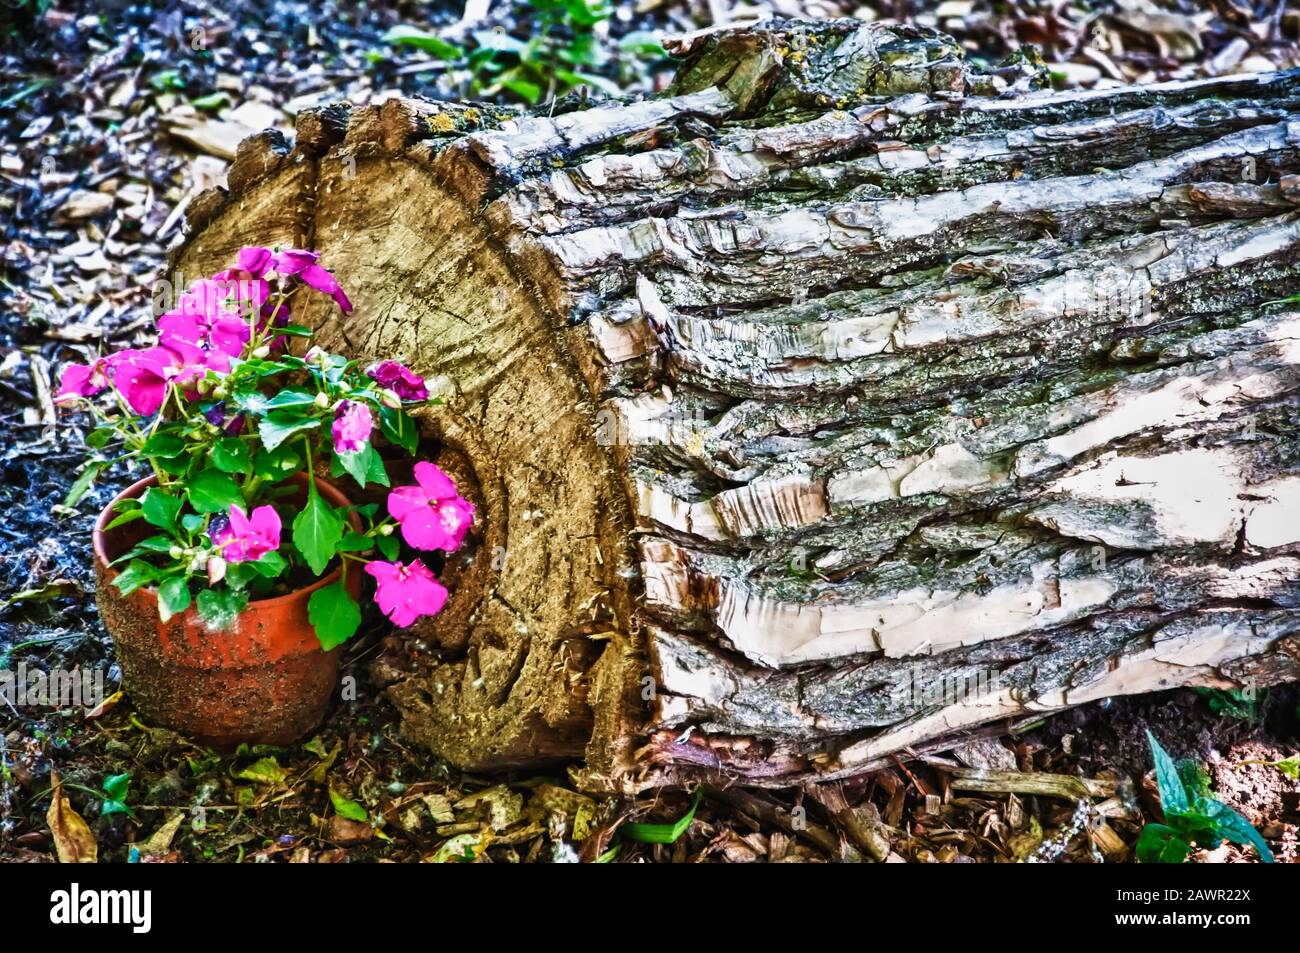 Closuep shot of a pot with beautiful pink flowers near the cut tree trunk Stock Photo